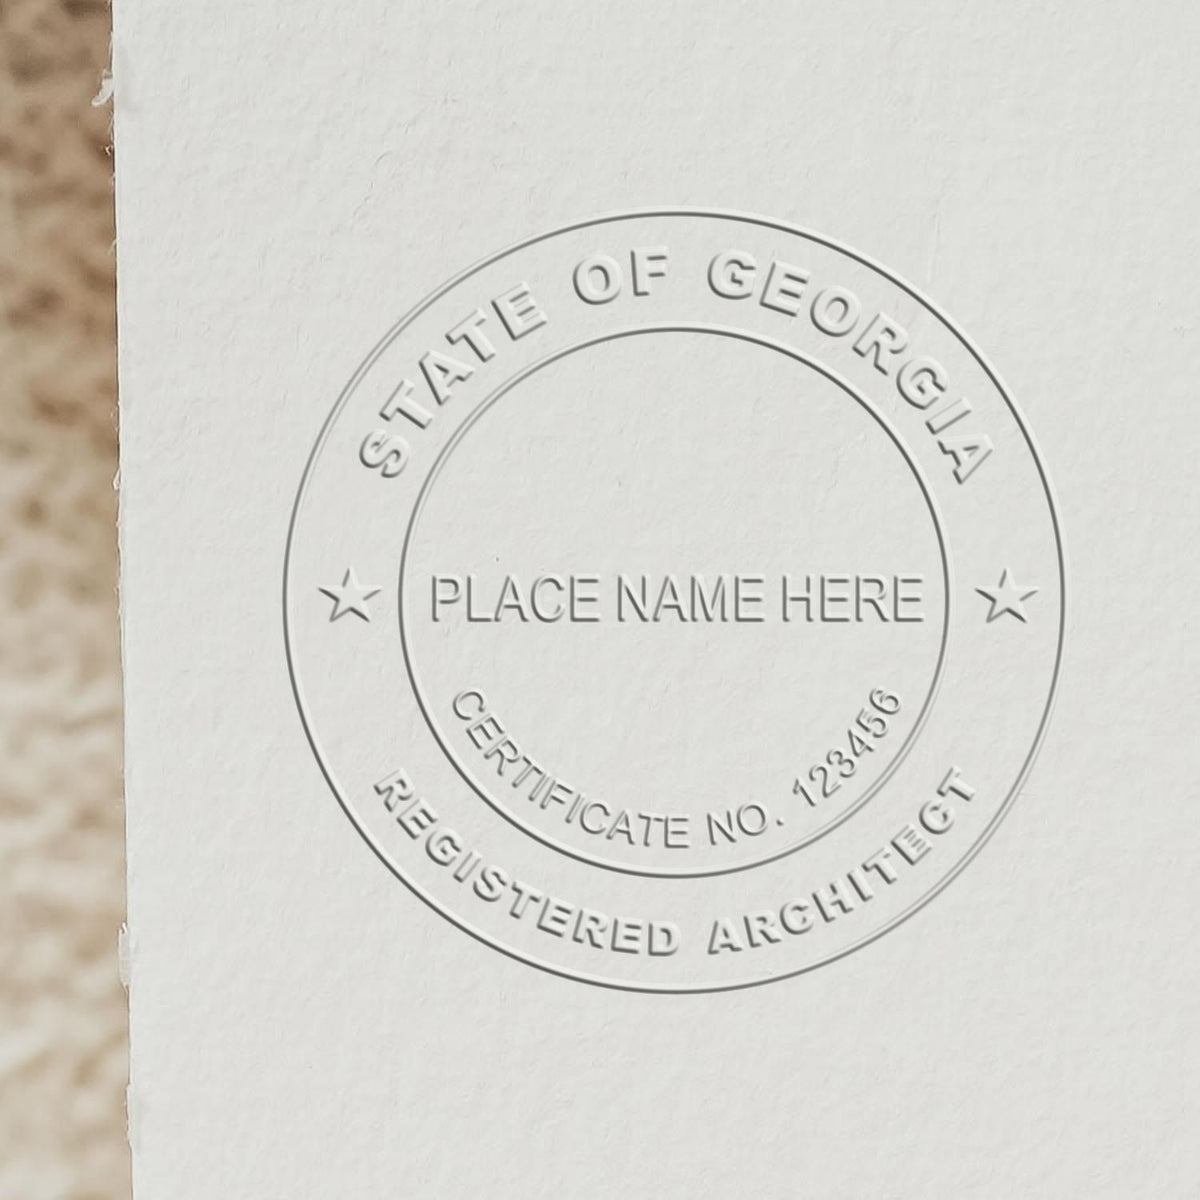 The State of Georgia Architectural Seal Embosser stamp impression comes to life with a crisp, detailed photo on paper - showcasing true professional quality.